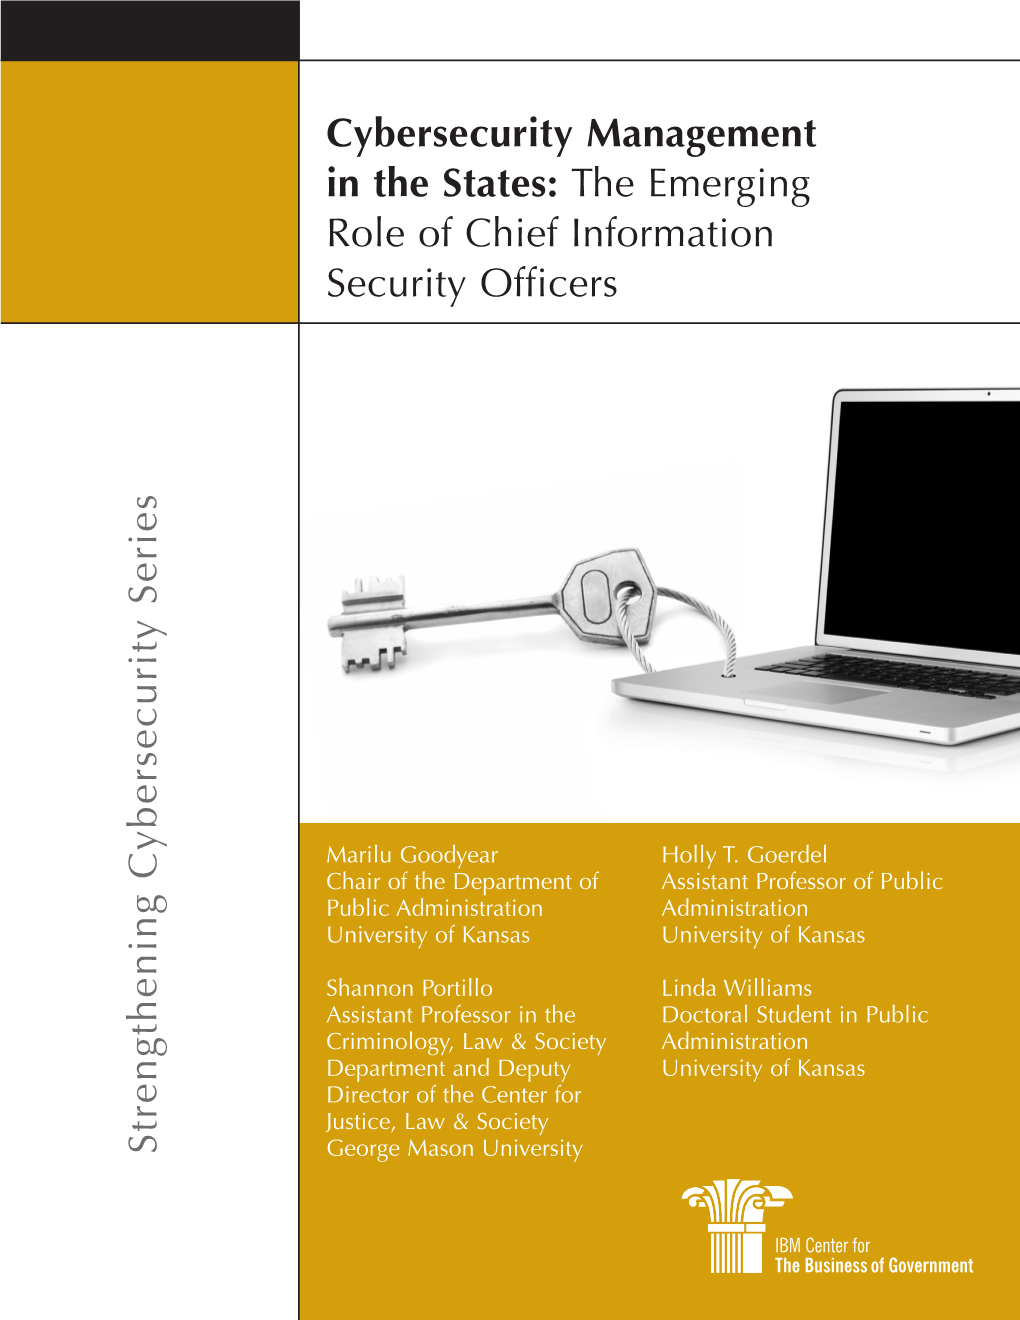 Cybersecurity Management in the States: the Emerging Role​ of Chief Information Security Officers